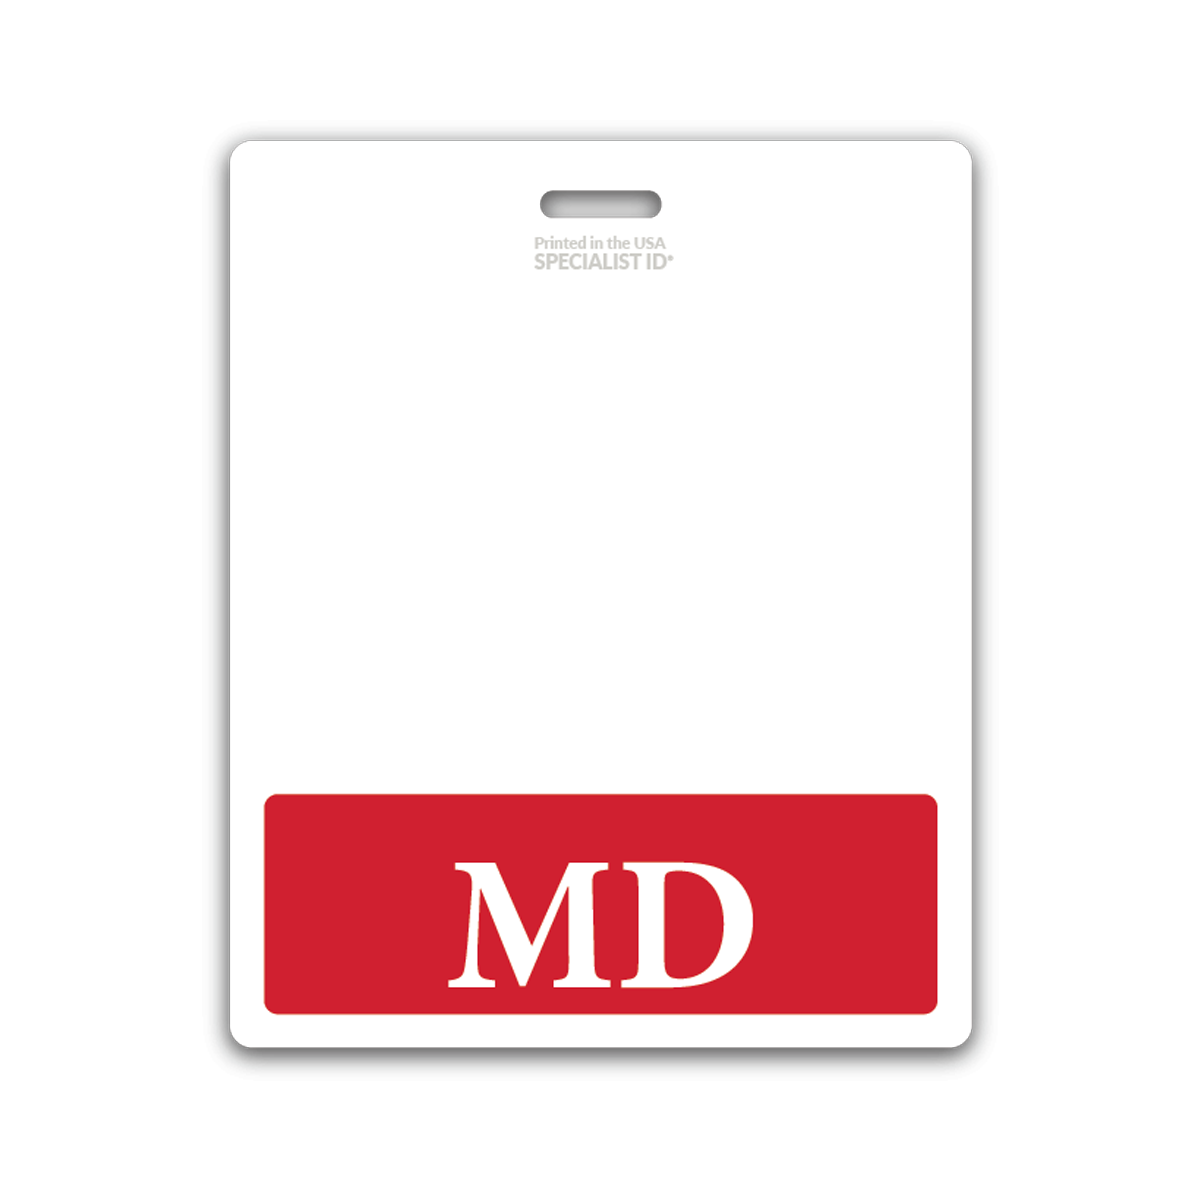 extra large and Long MD badge buddy with red border - double side print